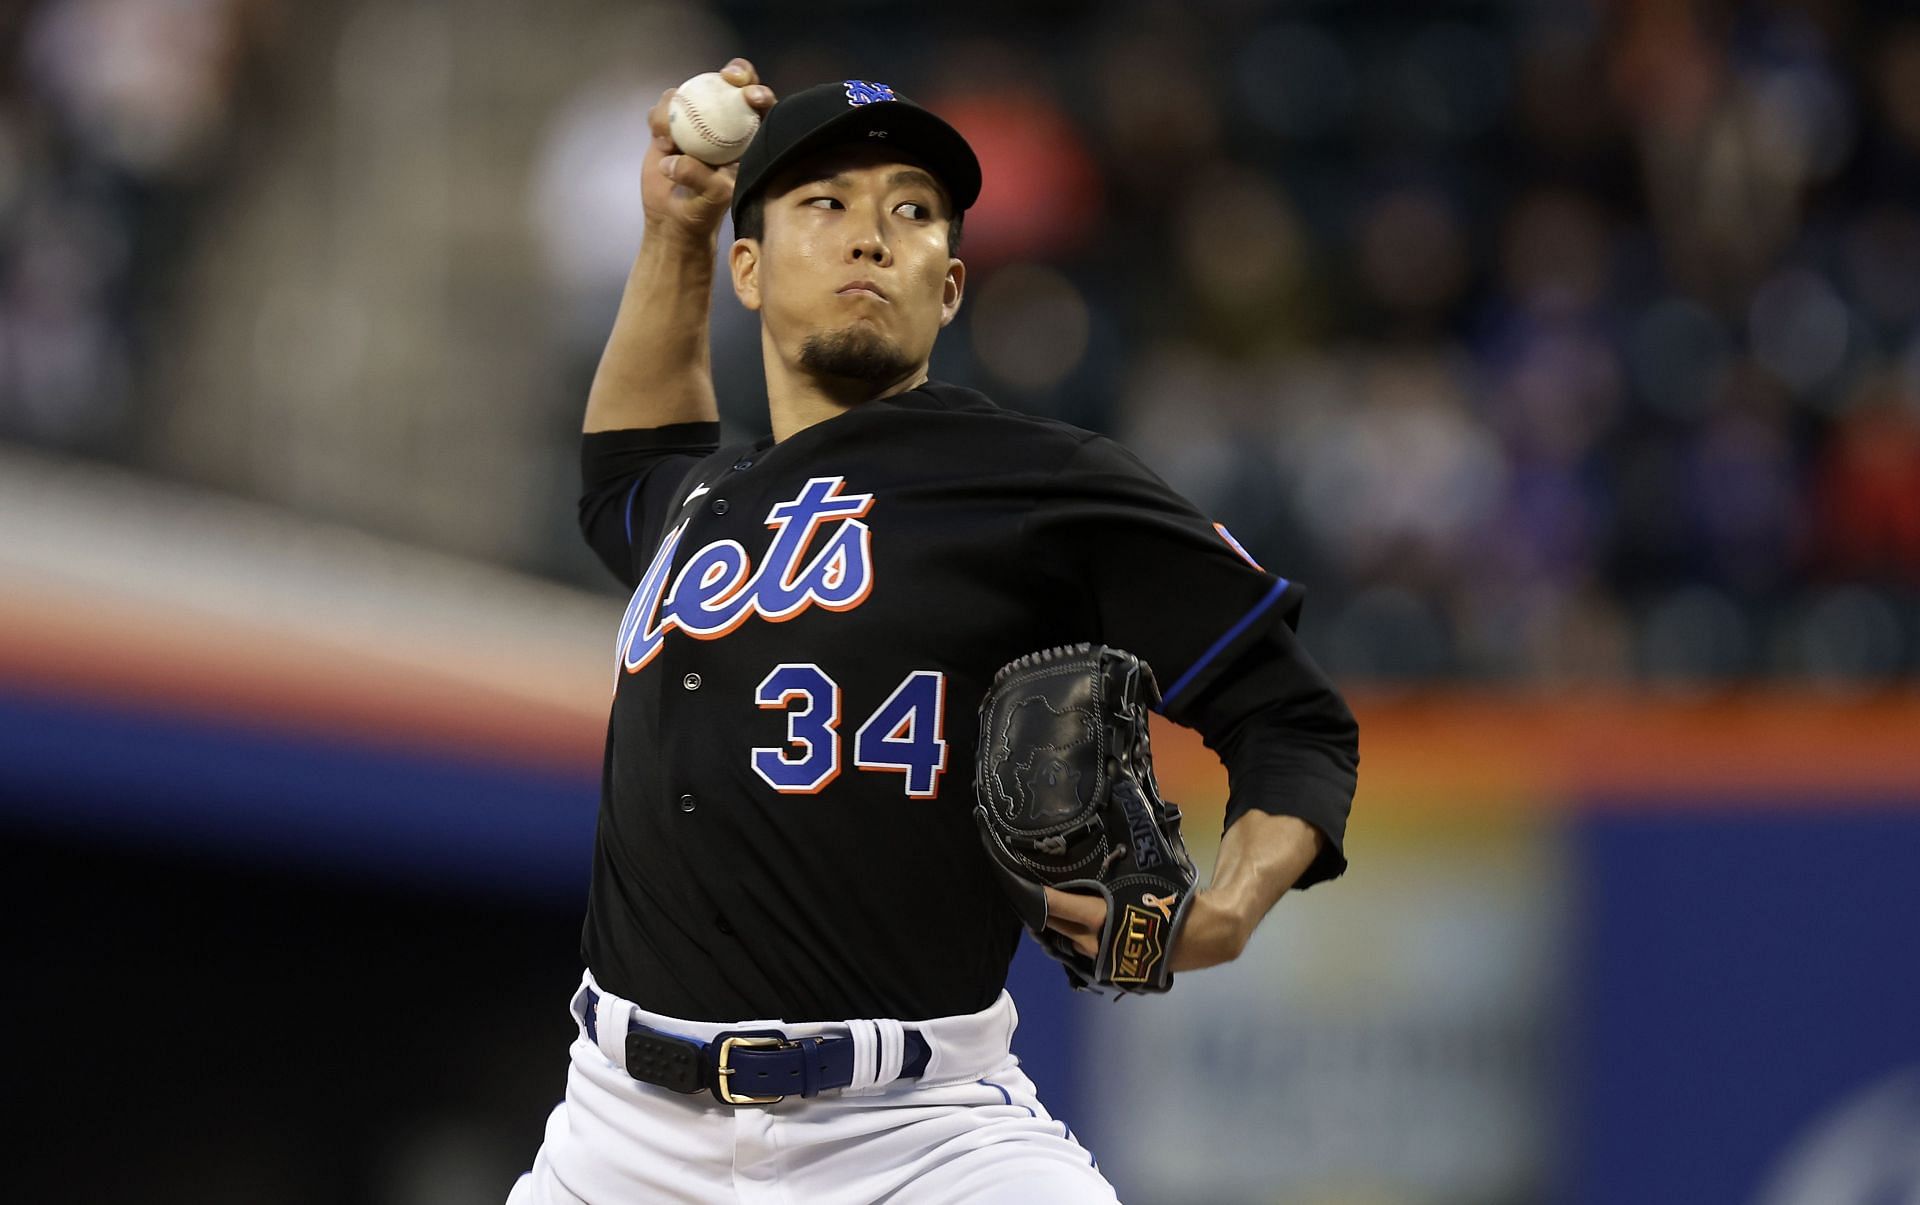 Kodai Senga pitches during the second inning of the game against the Colorado Rockies at Citi Field